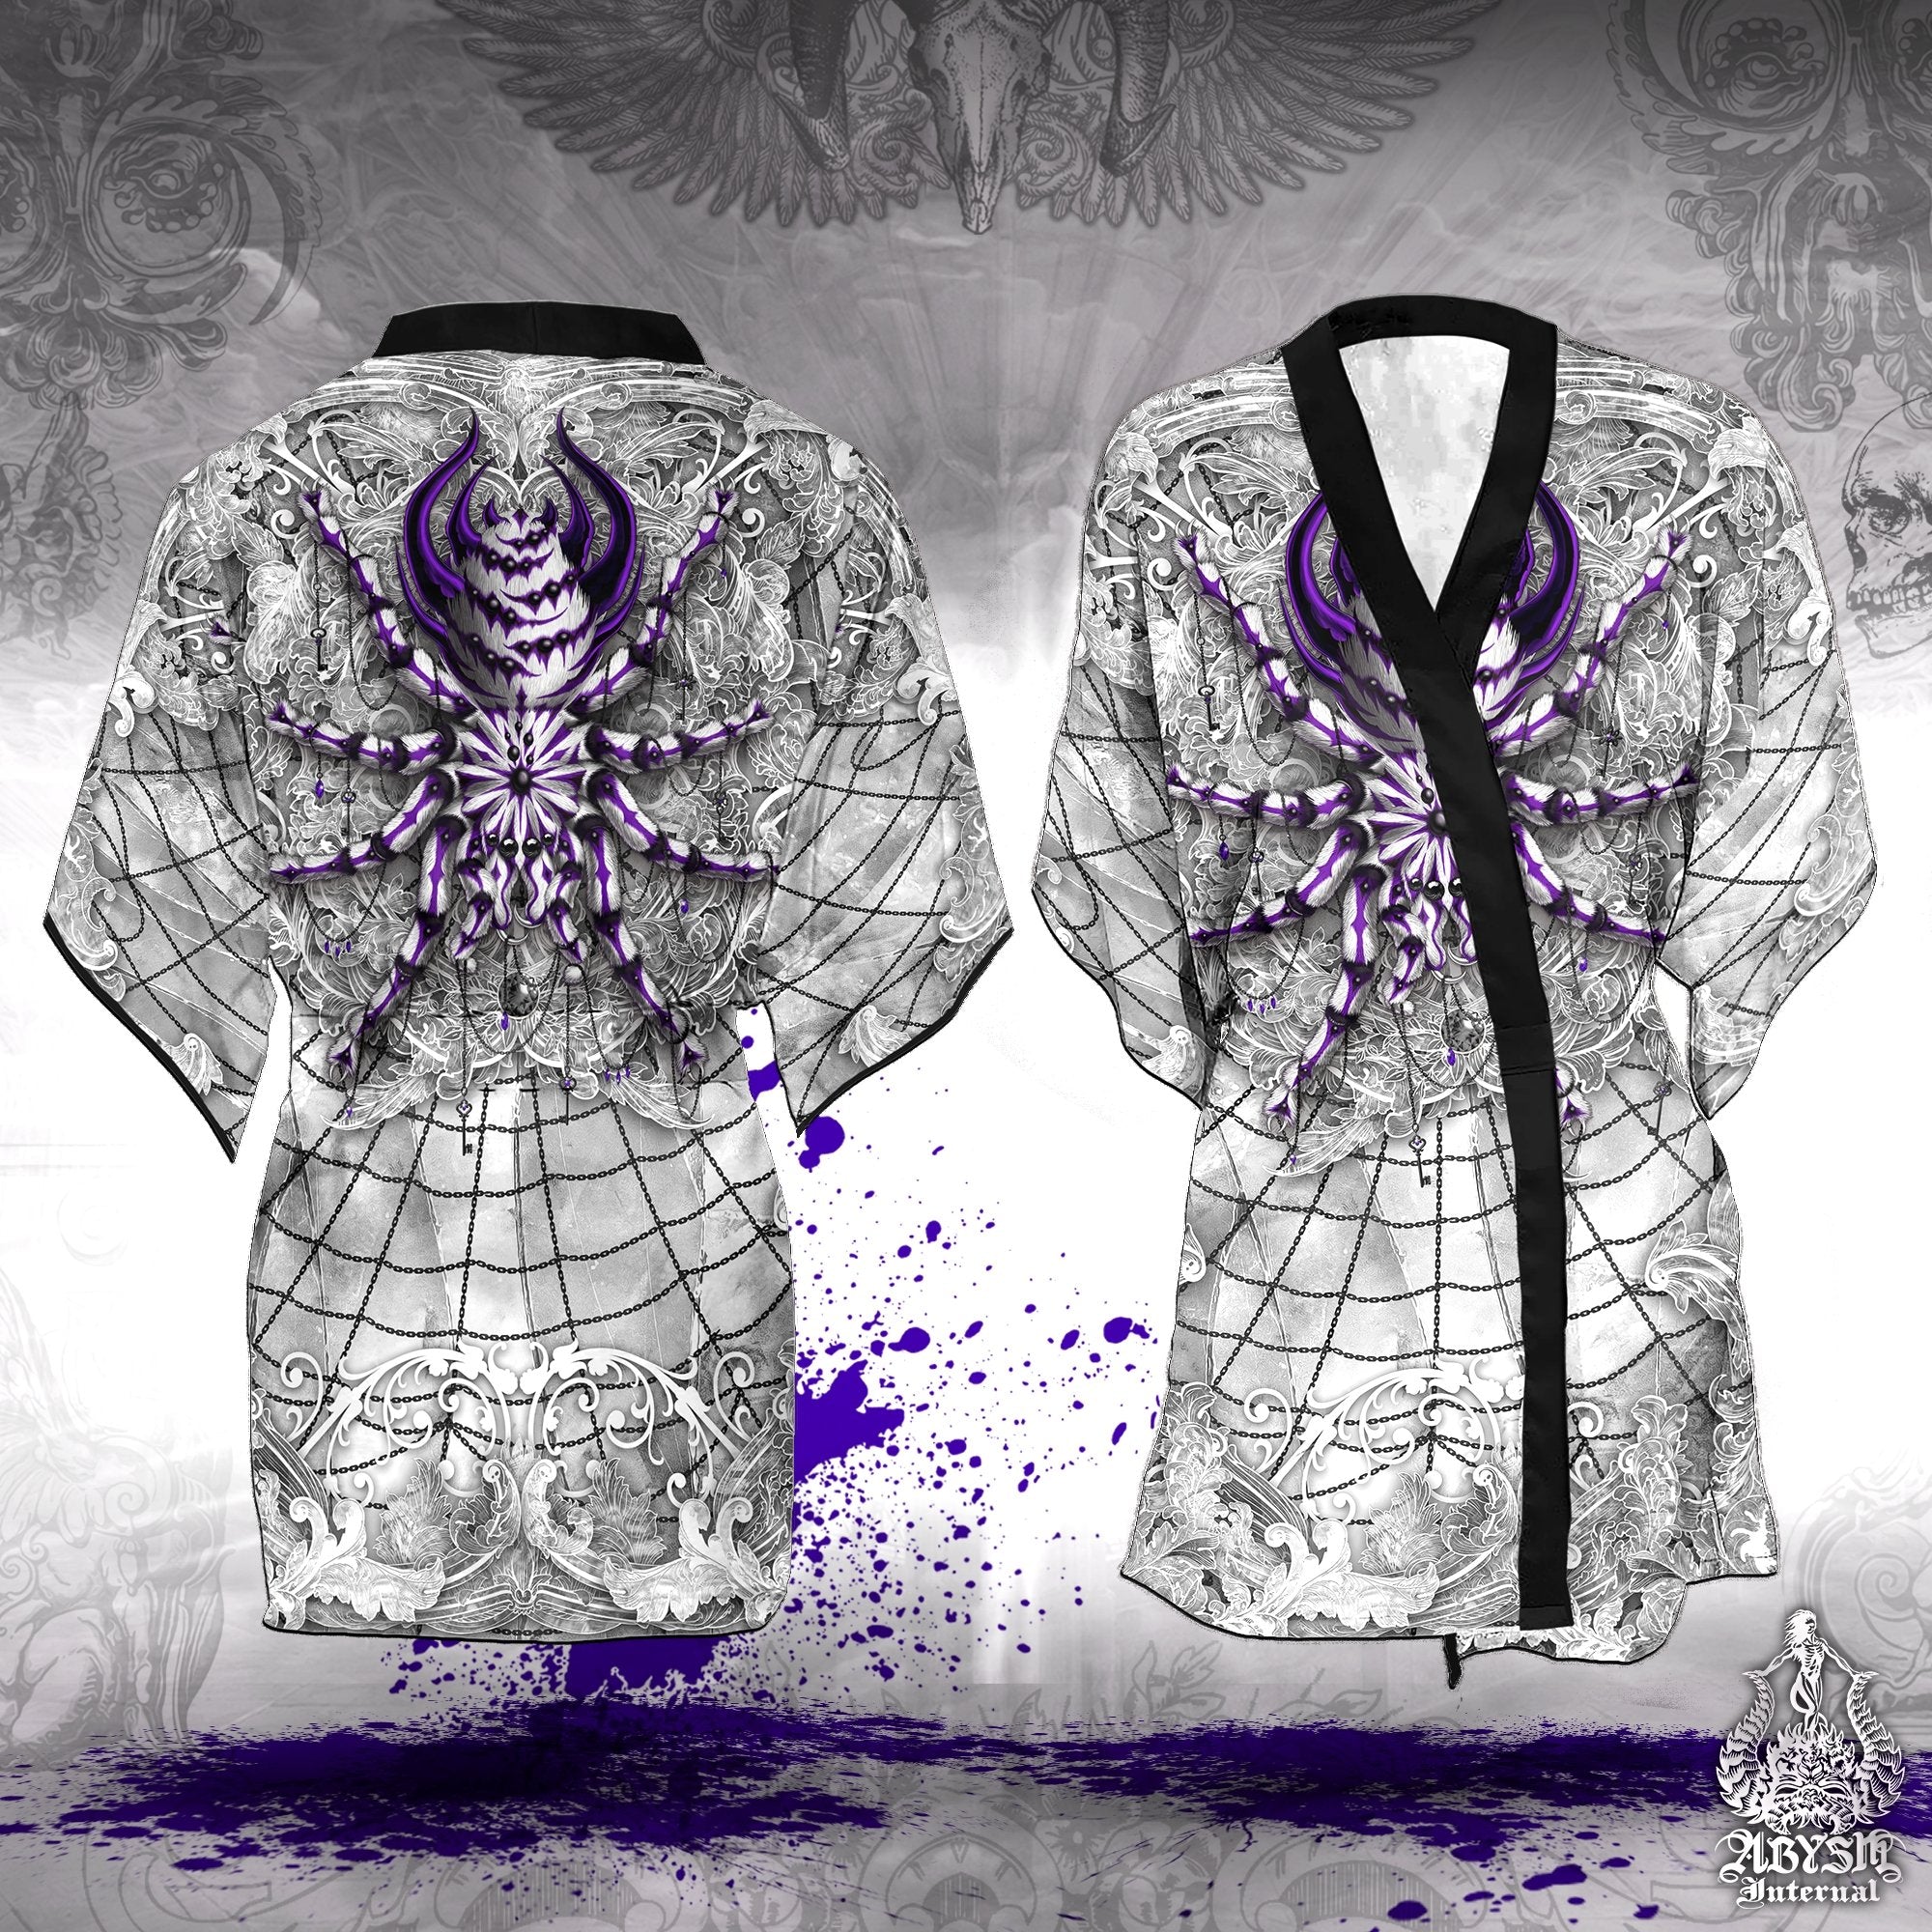 White Goth Cover Up, Beach Outfit, Spider Party Kimono, Summer Festival Robe, Indie and Alternative Clothing, Unisex - Tarantula, Stone Purple - Abysm Internal